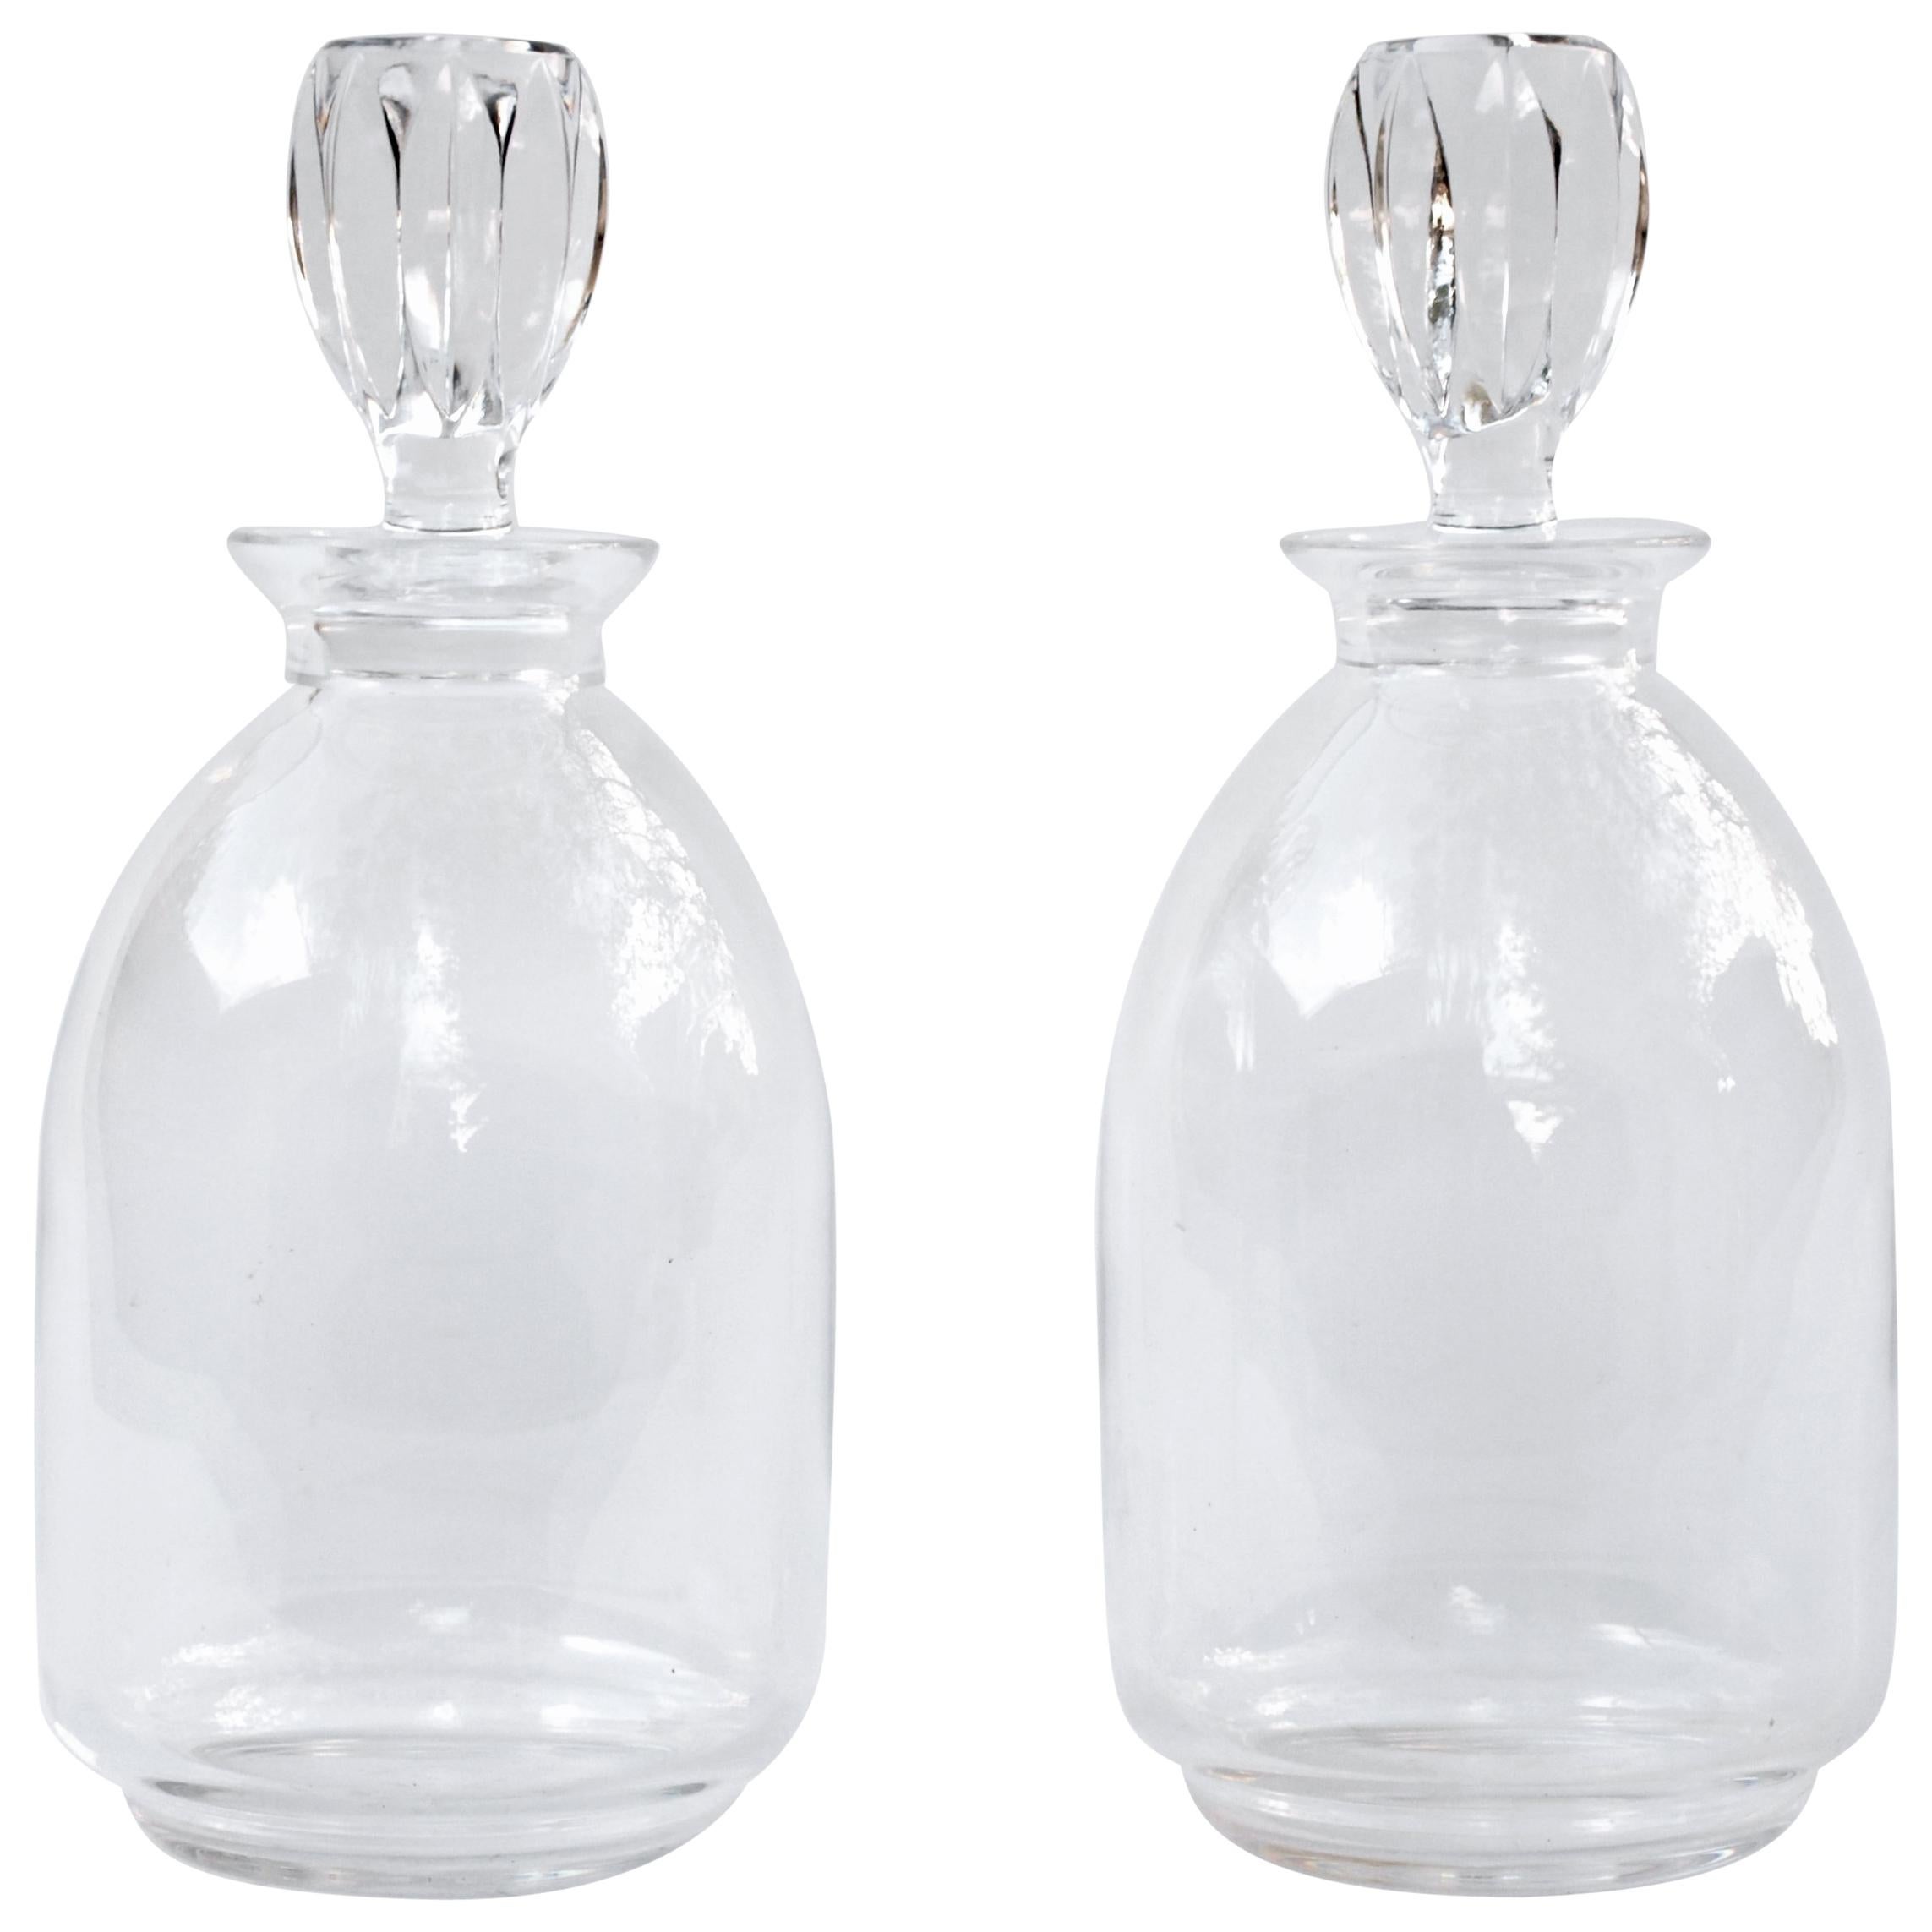 Pair of Lalique Crystal Decanters, 1970